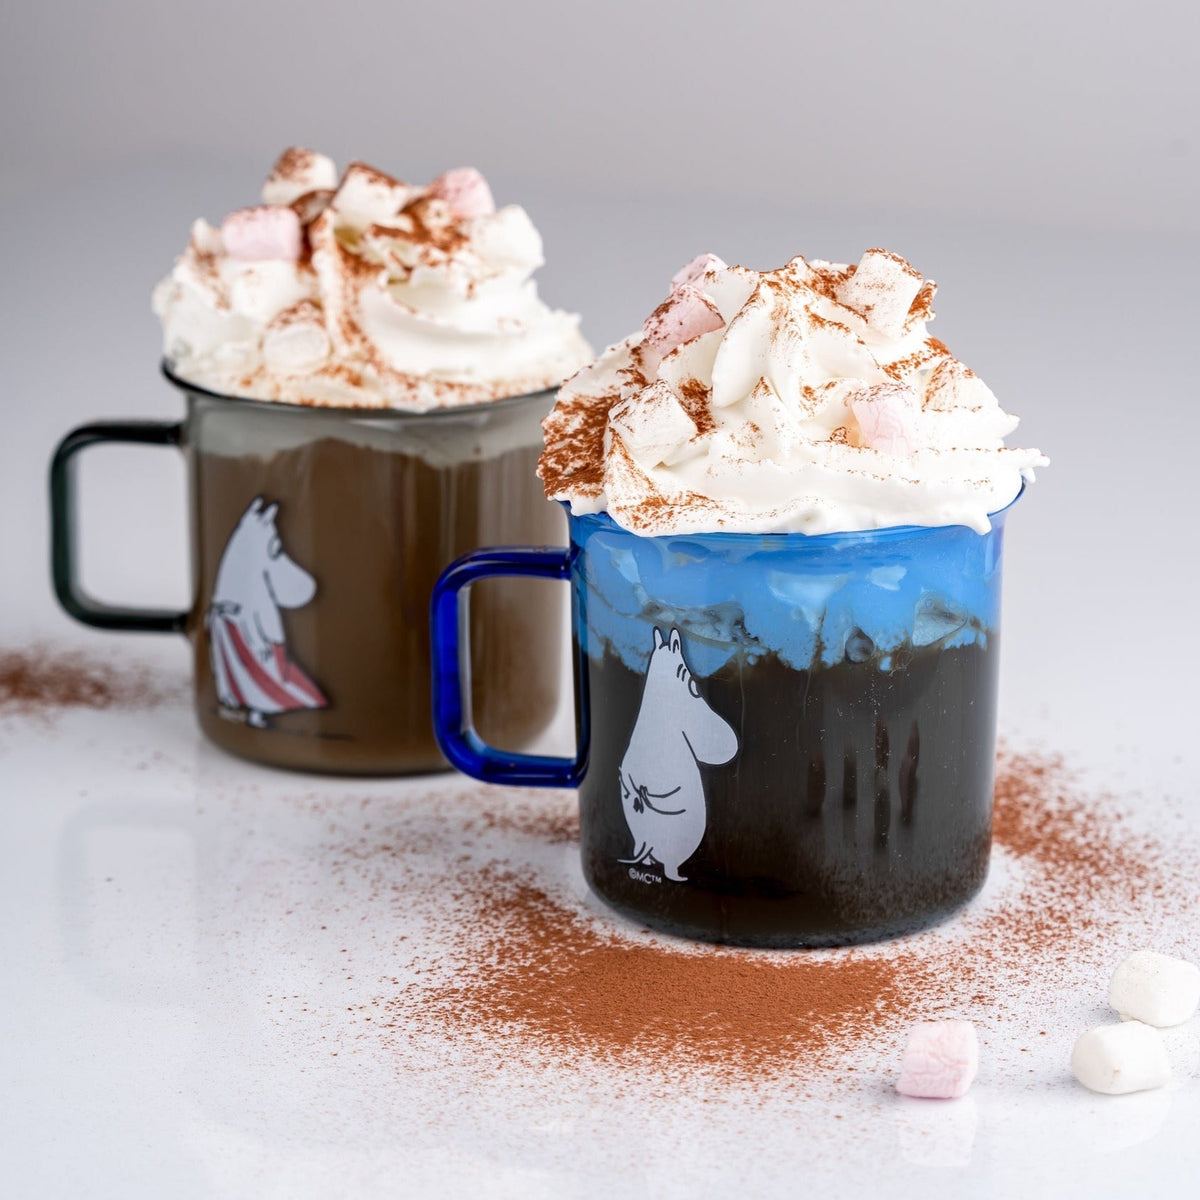 Hot chocolate with cream served in Moomin Glass Mugs by Muurla Design